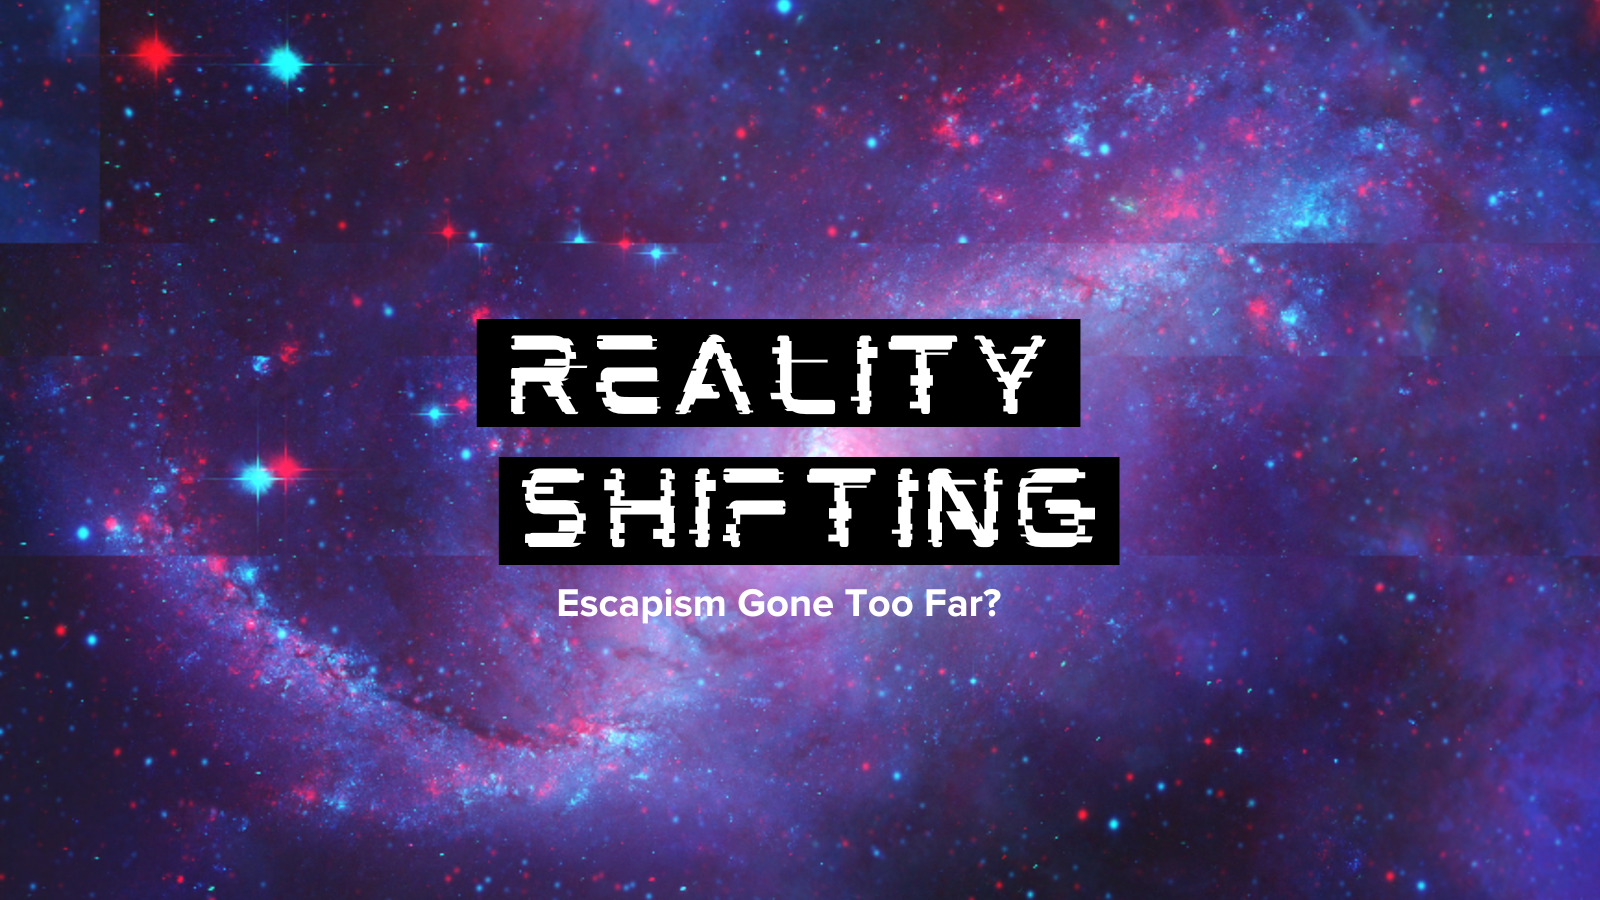 "Reality Shifting" on a galaxy background